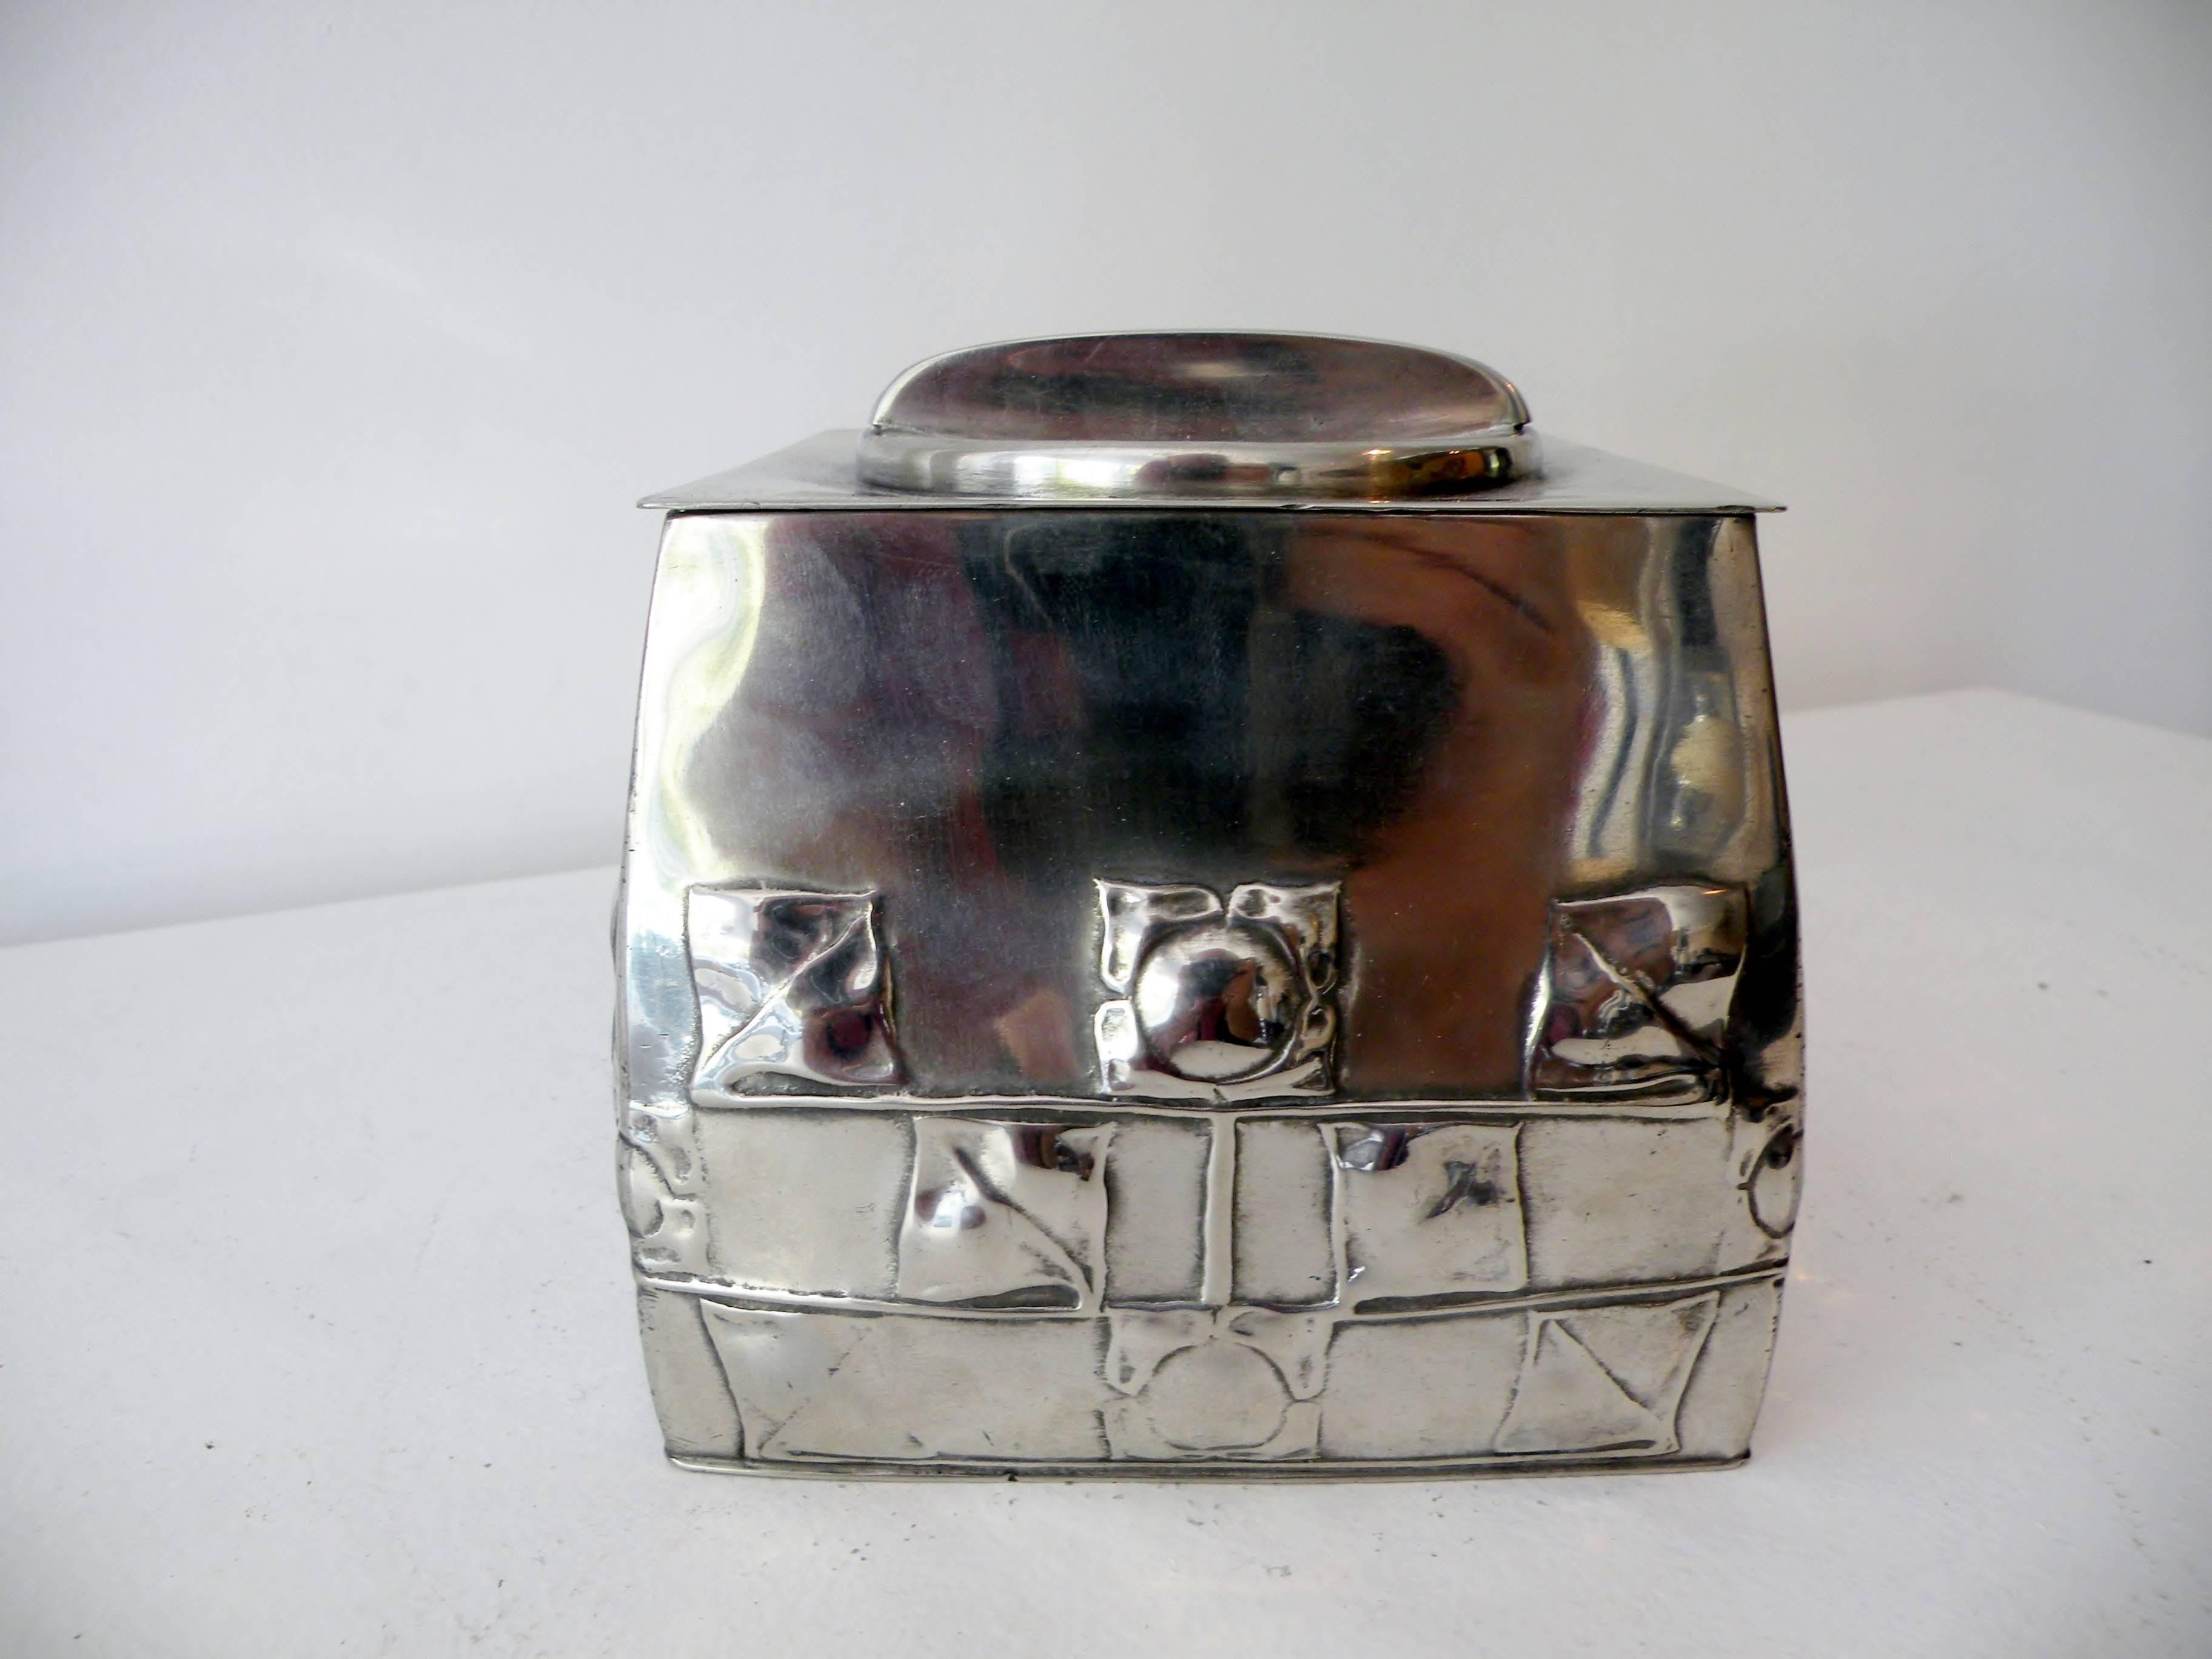 Early 20th century Archibald Knox Tudric pattern biscuit box, model number 0194. Designed for London's Liberty & Co., crafted of pewter, and marked to base. Measures 5.5